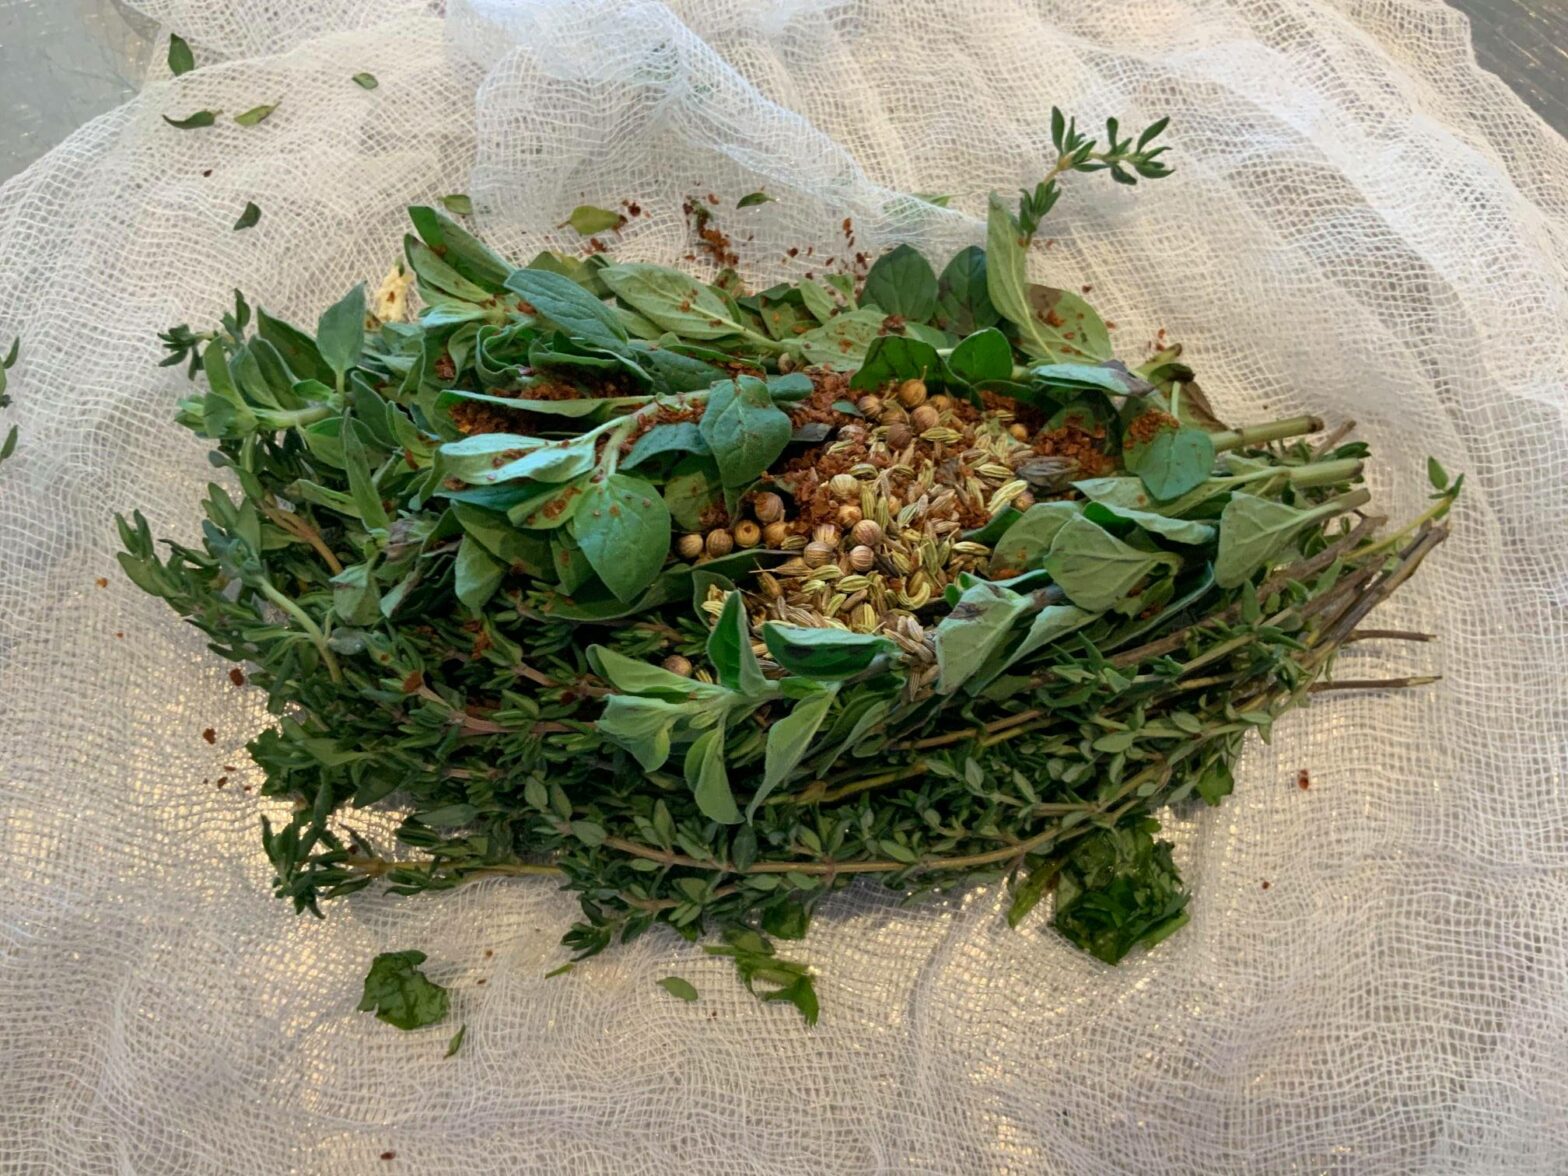 green herbs and roasted spices sit on cheesecloth